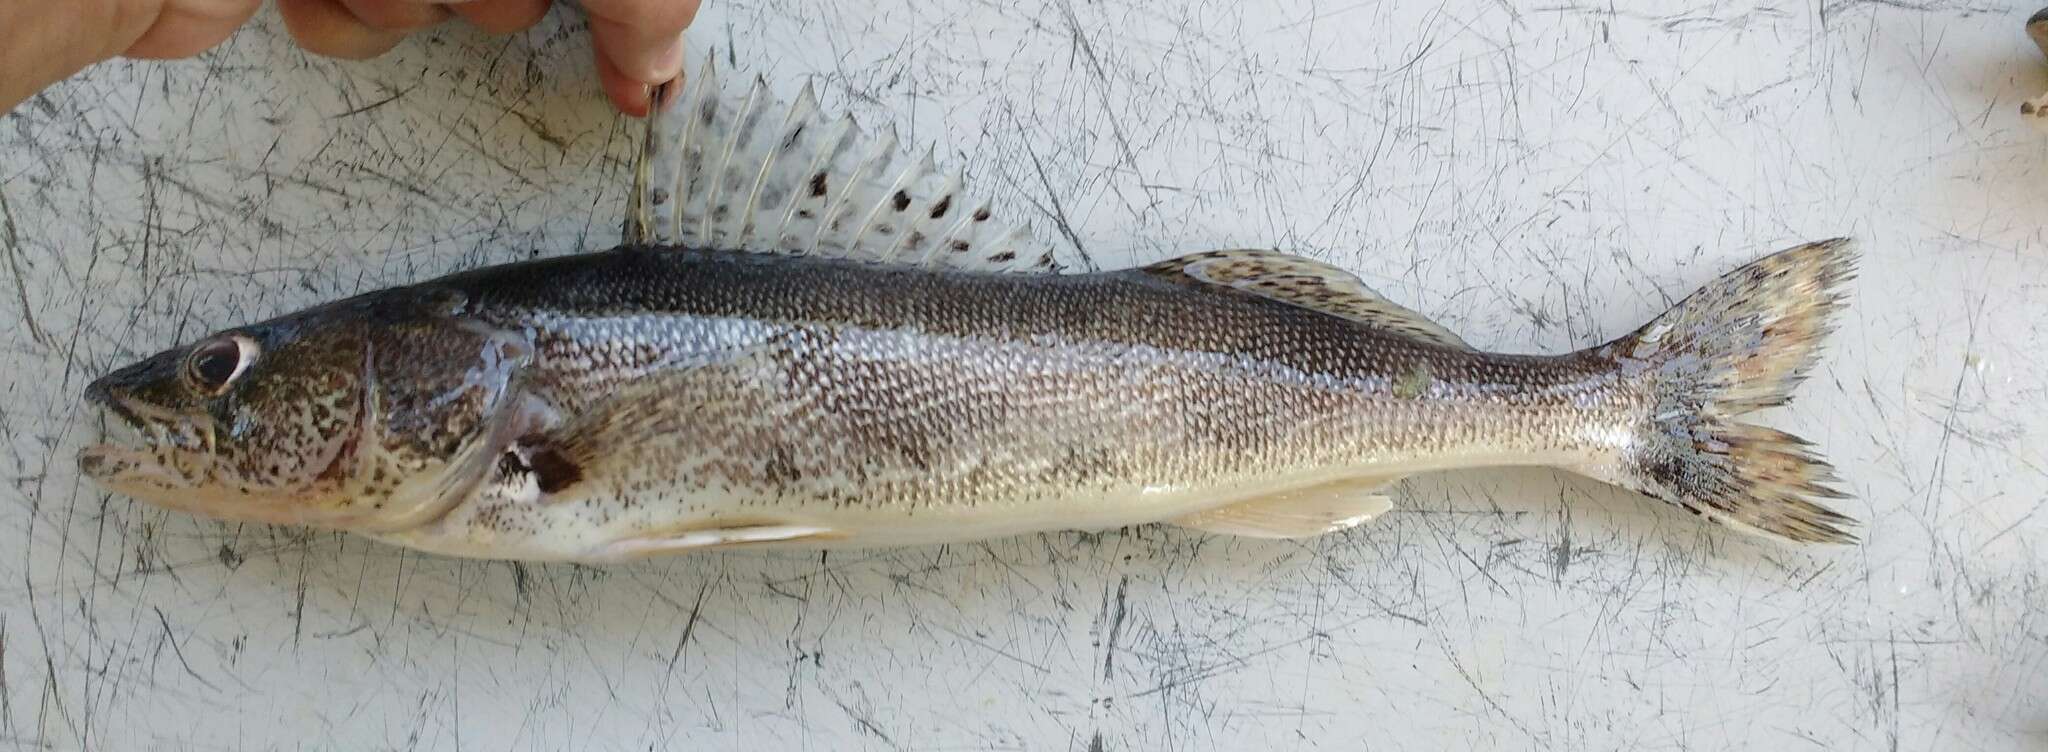 Image of Pike perch